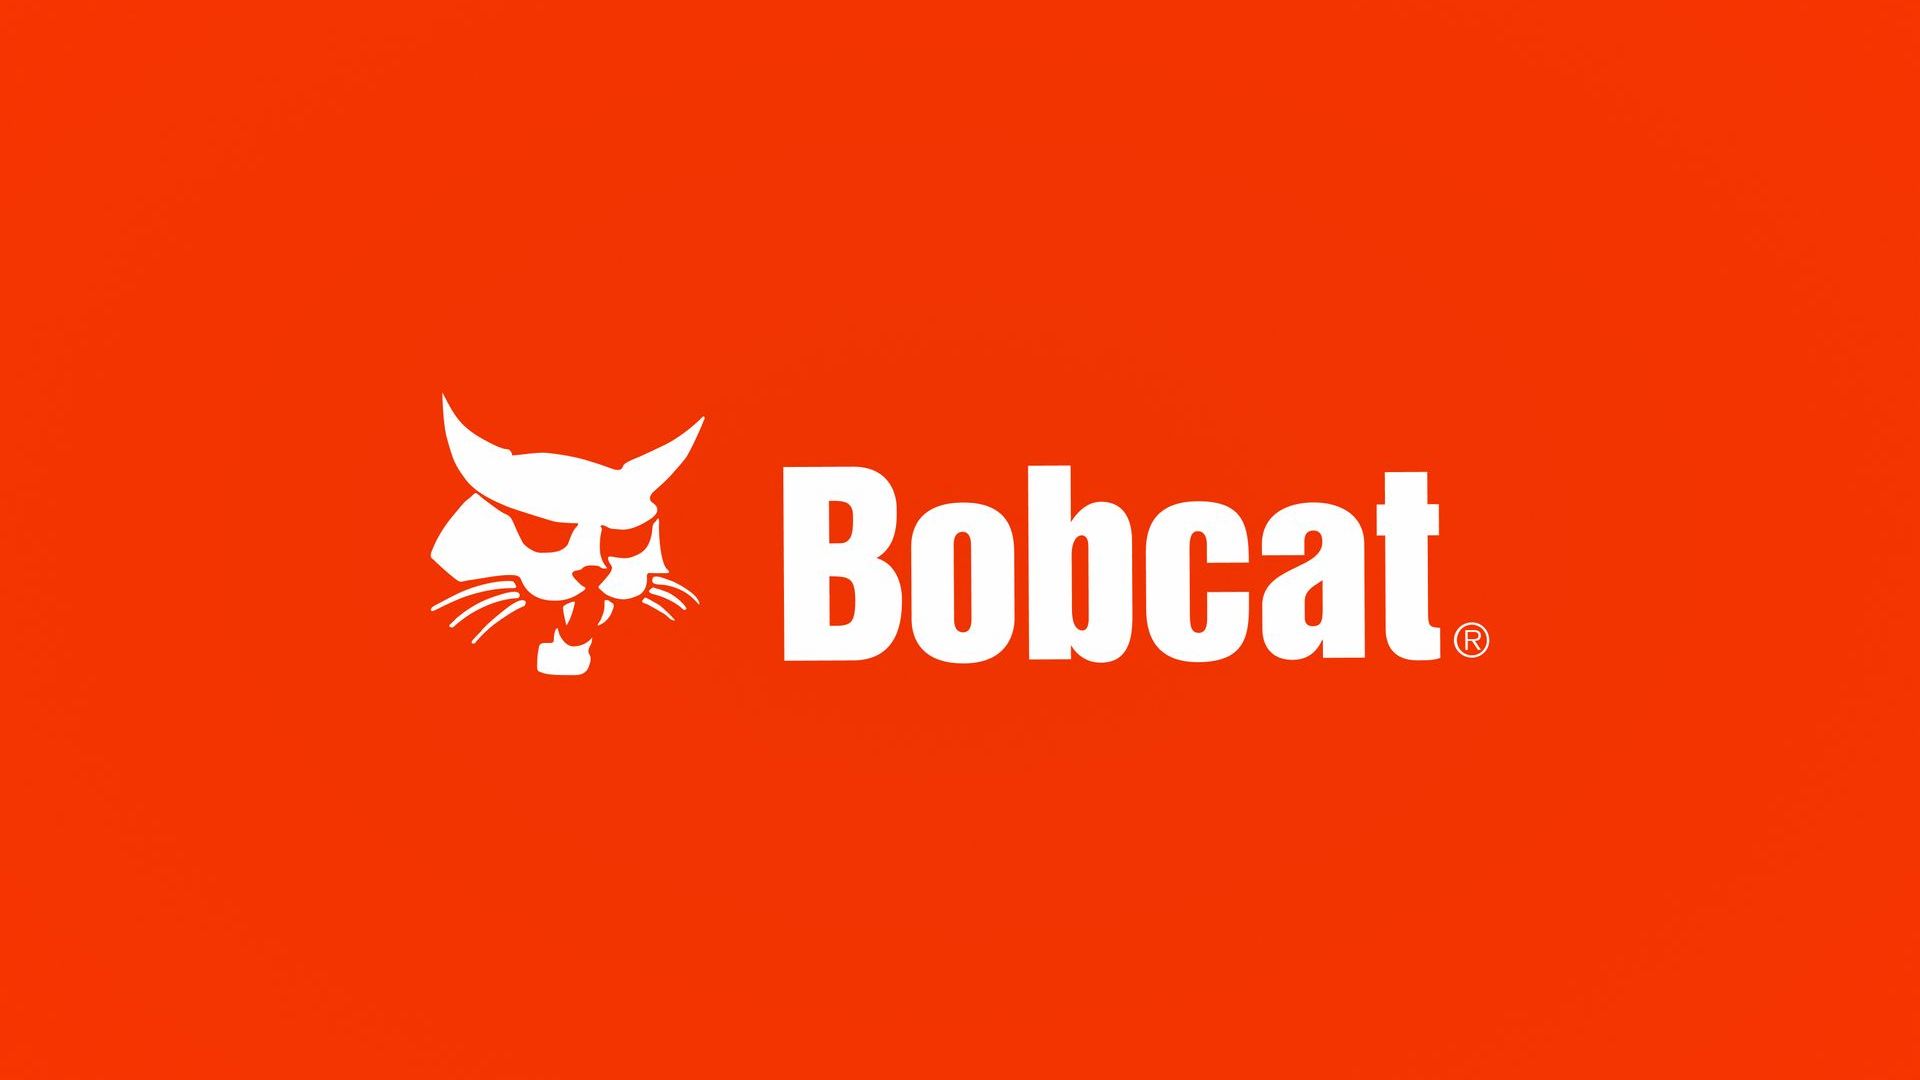 The bobcat logo is on a red background.